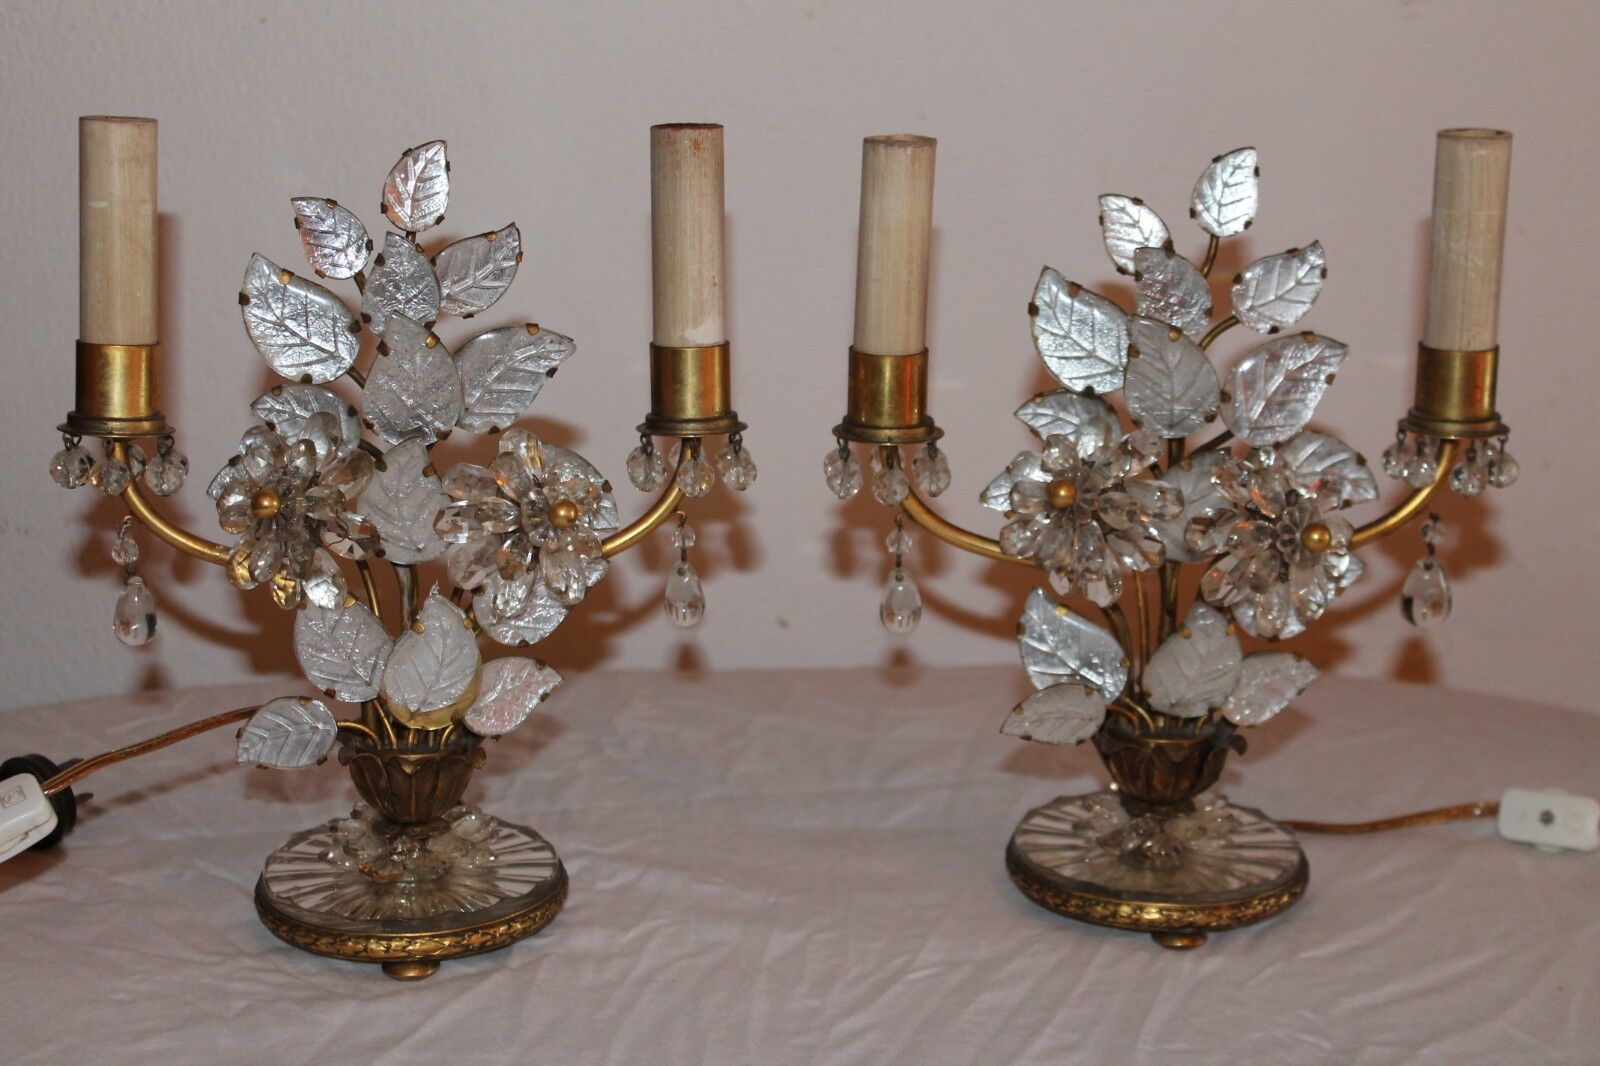 PR OF CUT CRYSTAL VASE FULL OF FLOWERS FRENCH ARTDECO MAISON BAGUES  TABLE LAMPS